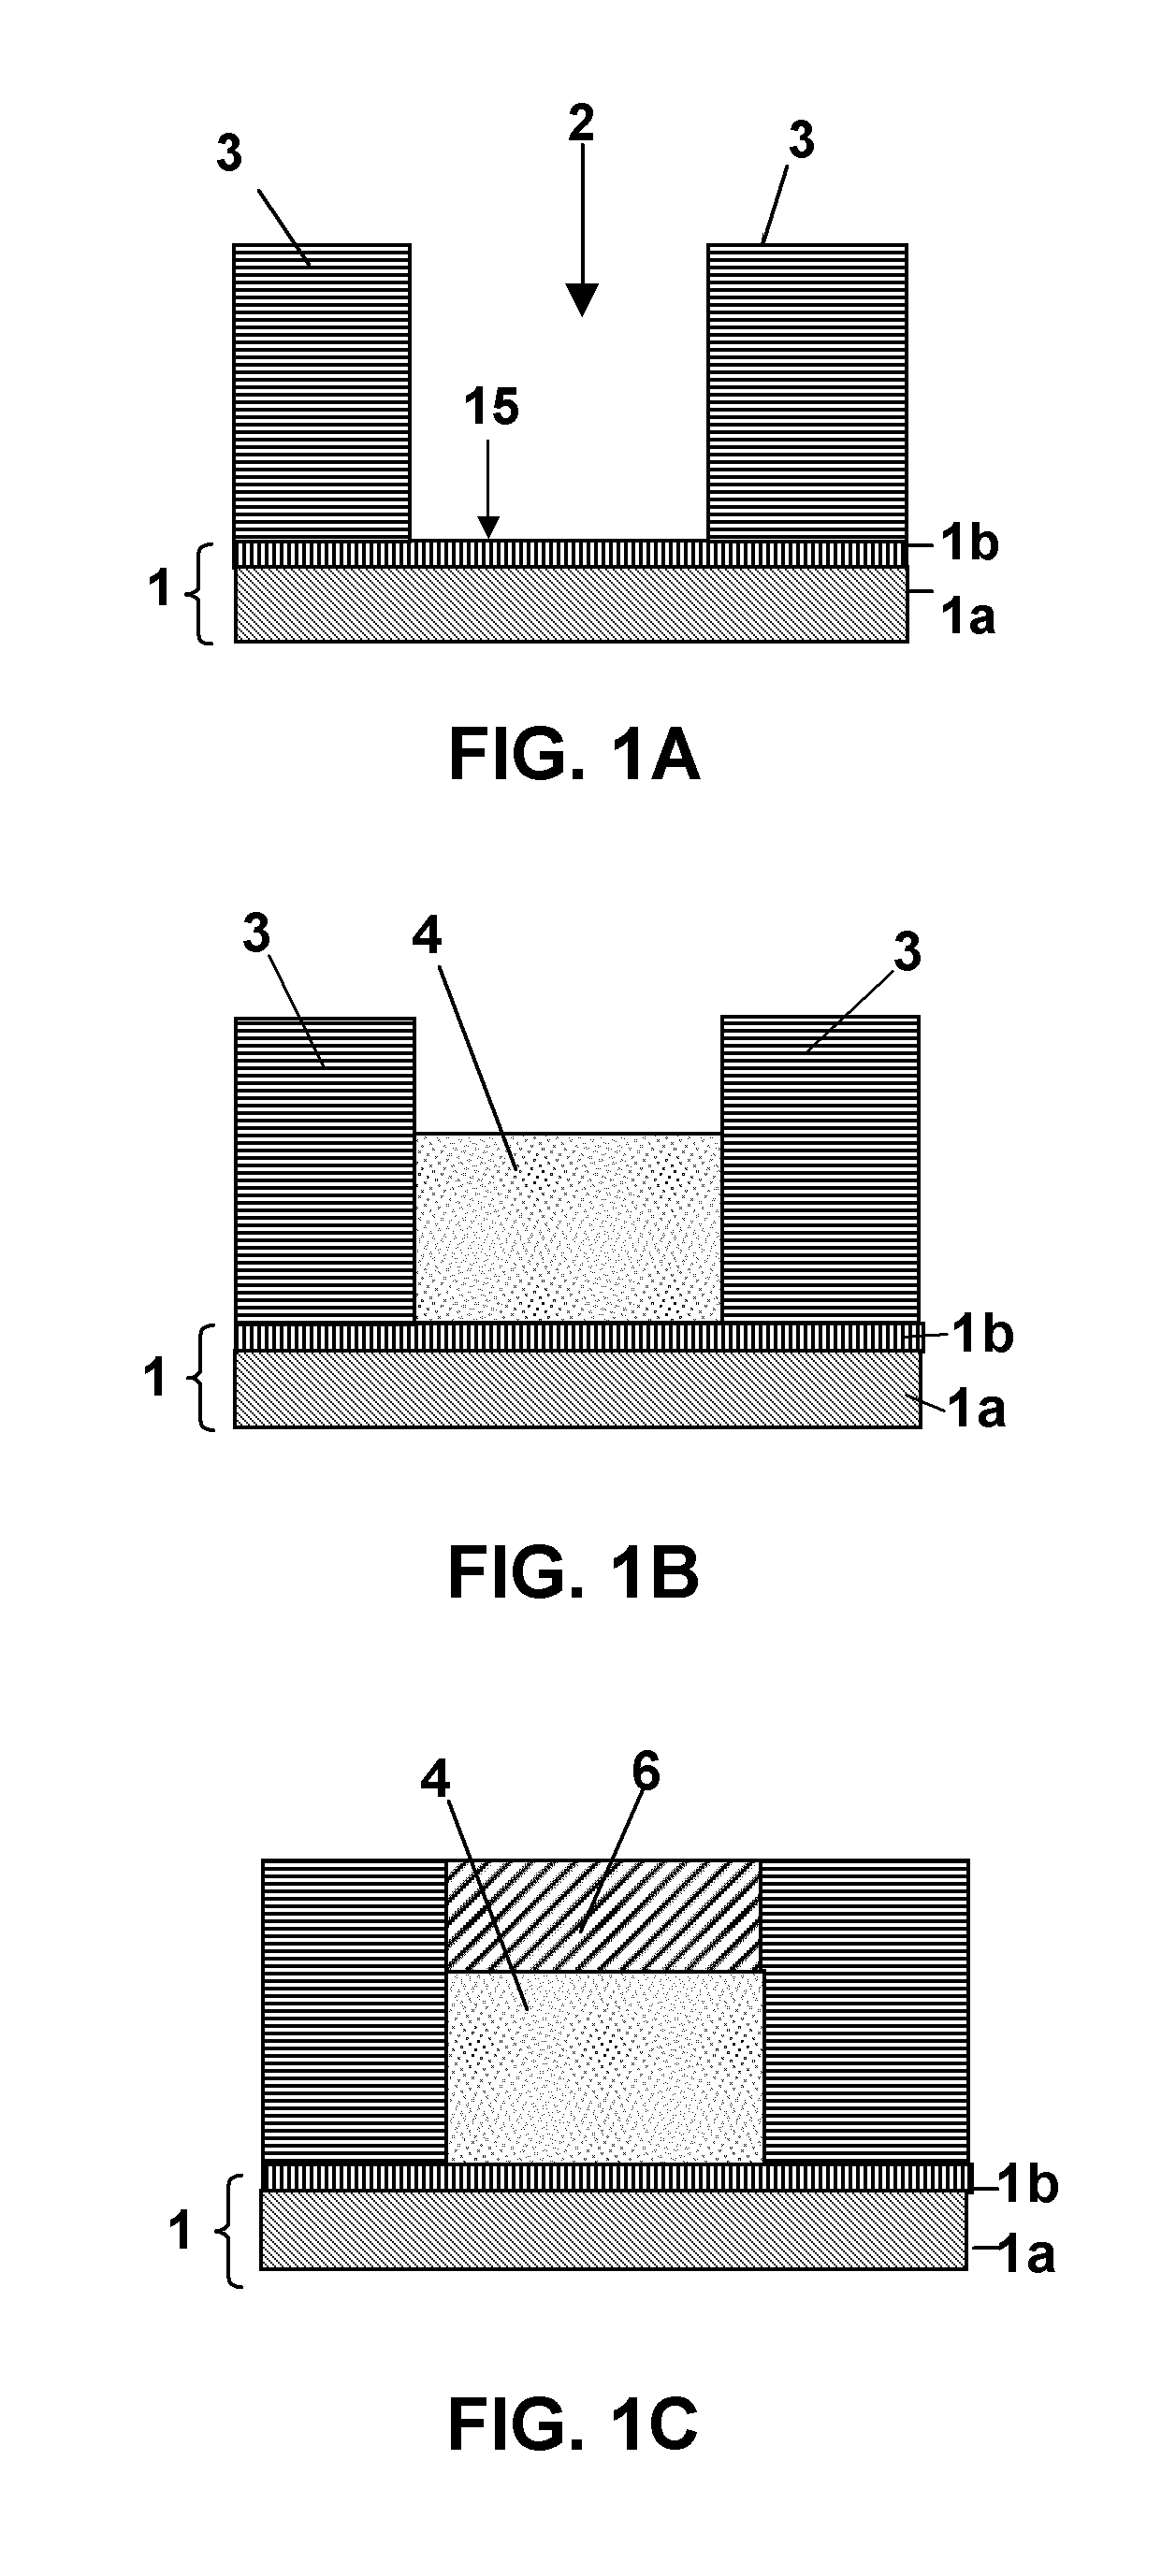 Method for forming catalyst nanoparticles for growing elongated nanostructures